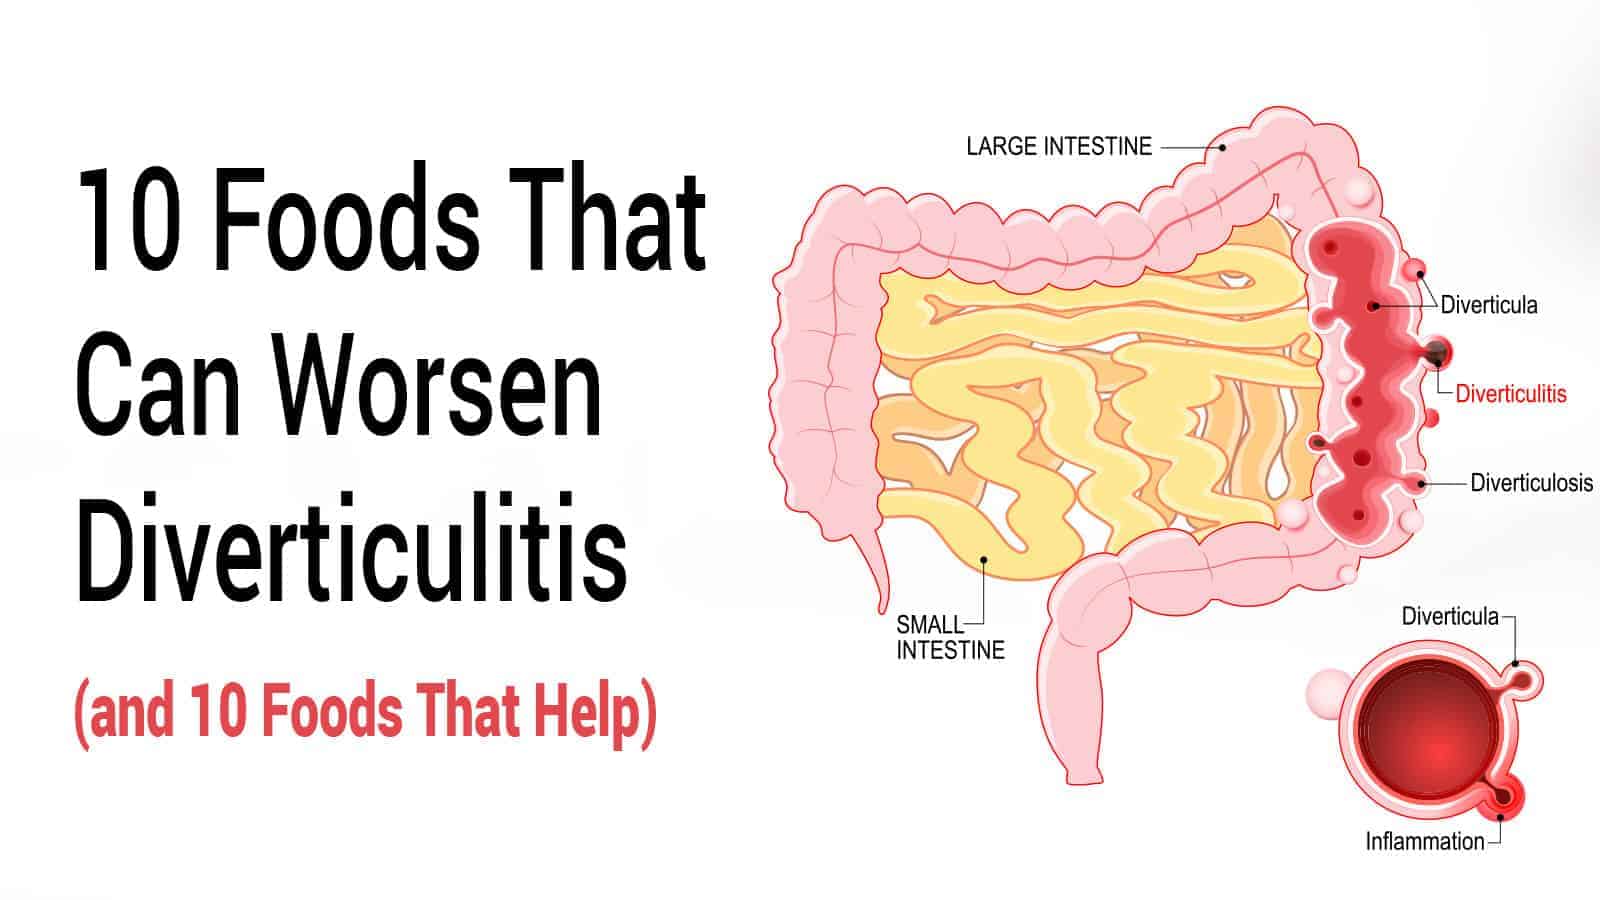 10 Foods That Can Worsen Diverticulitis (and 10 Foods That Help)